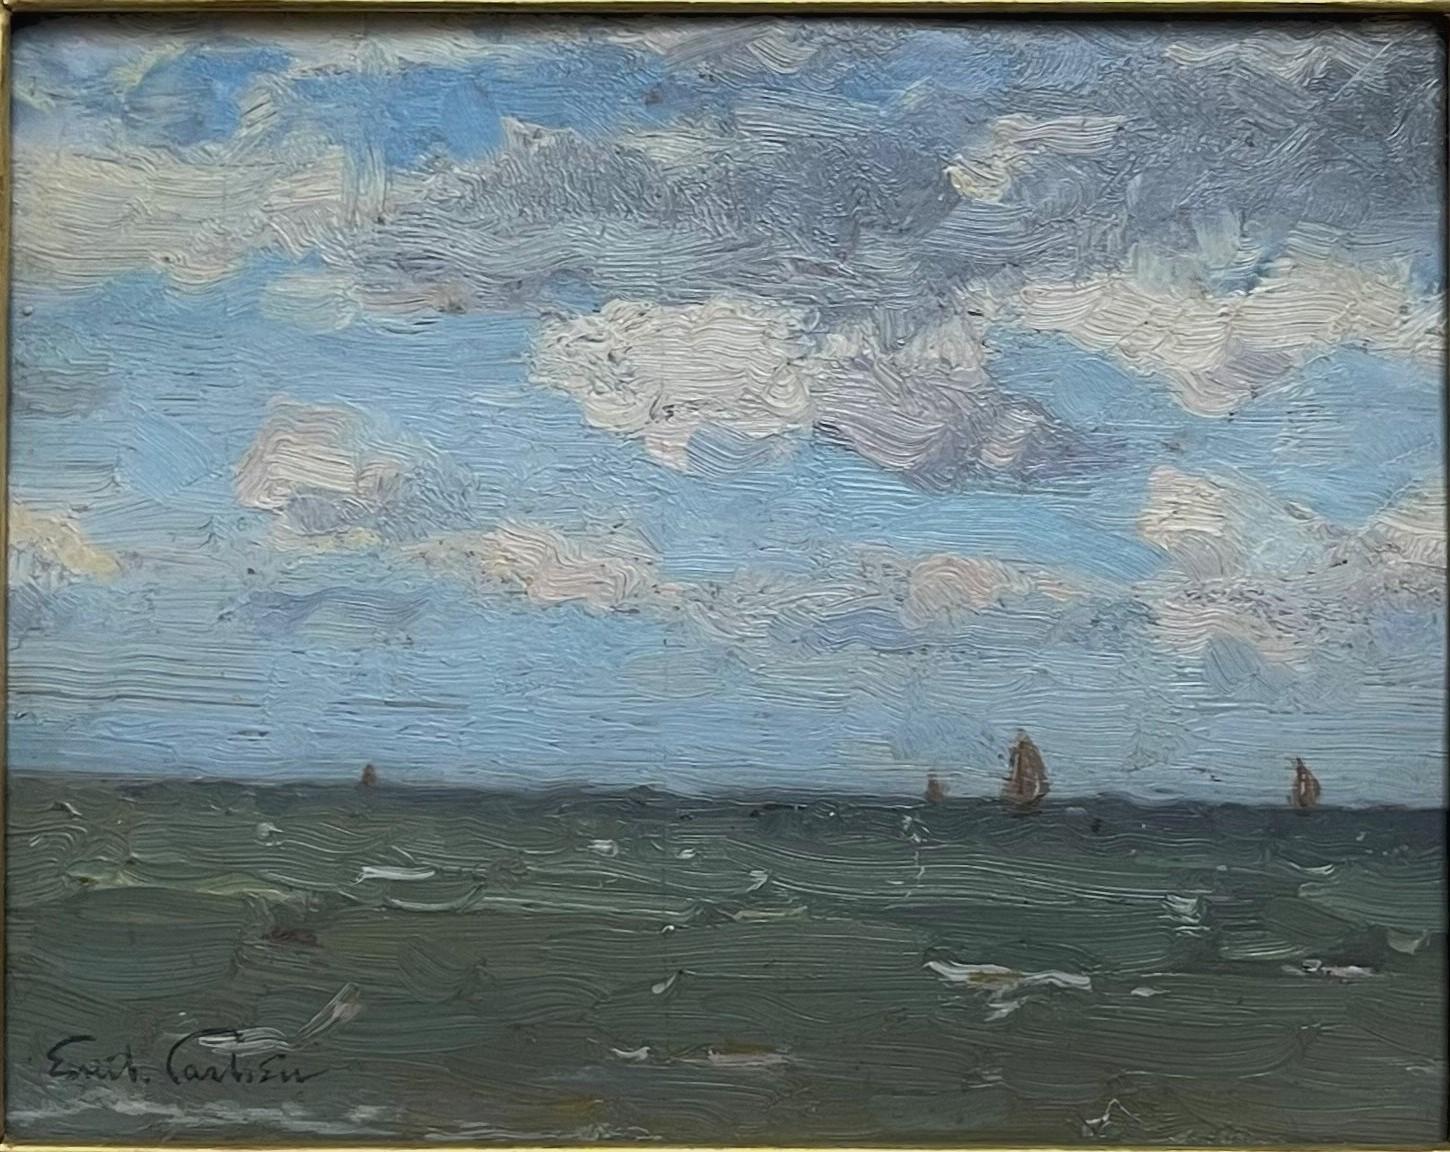 Emil (Soren Emil) Carlsen (1848 or 53 - 1932) 
Seascape with Boats
Oil on Board, Signed, Measures ( 6 x 8.5 inches unframed )
 w/frame ( 12.75 x 14.25 inches )
The painting is in good condition and the frame shows a few nicks.
From Wikipedia, the